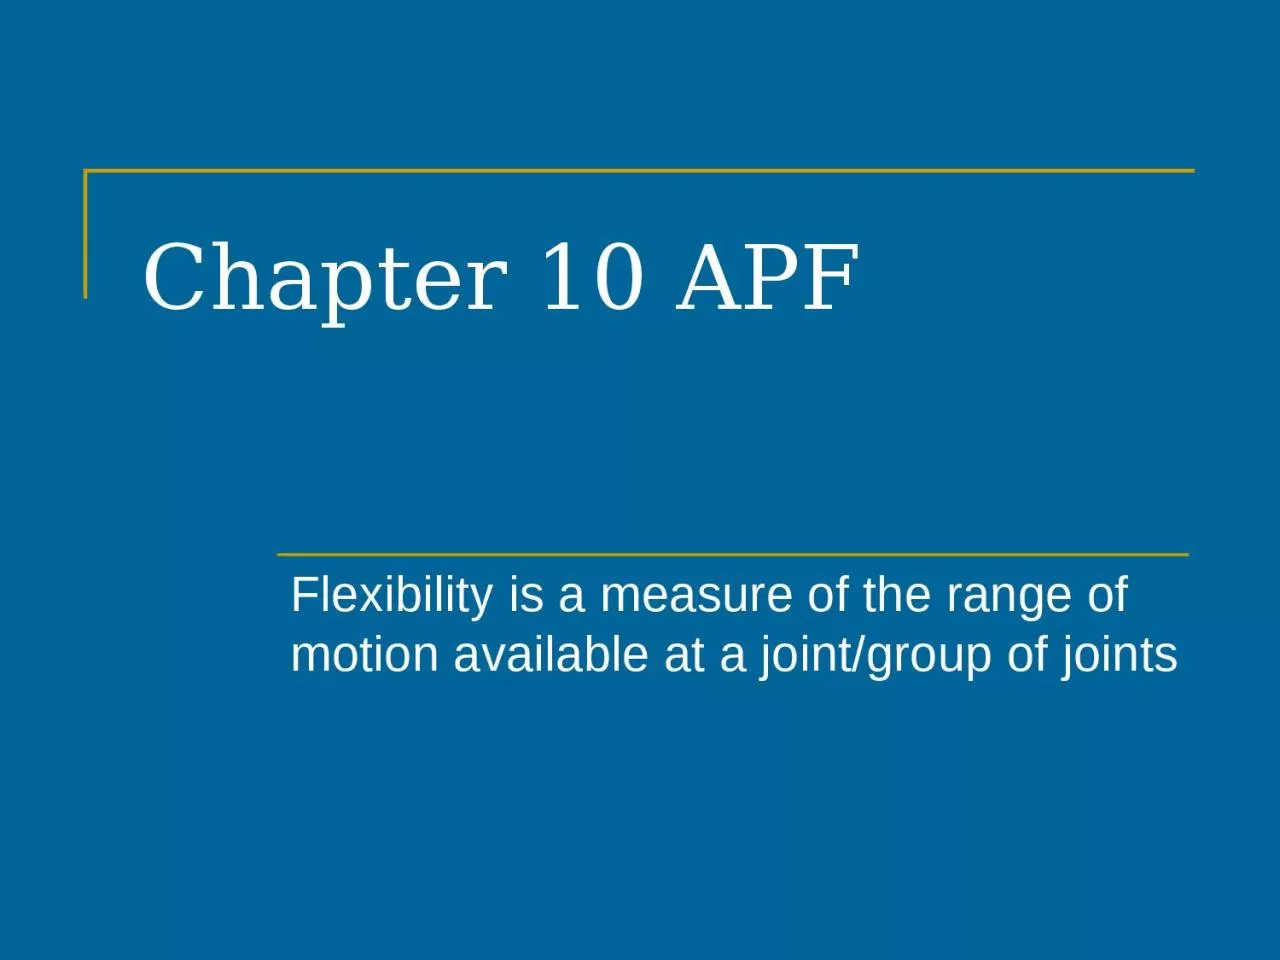 Chapter 10 APF Flexibility is a measure of the range of motion available at a joint/group